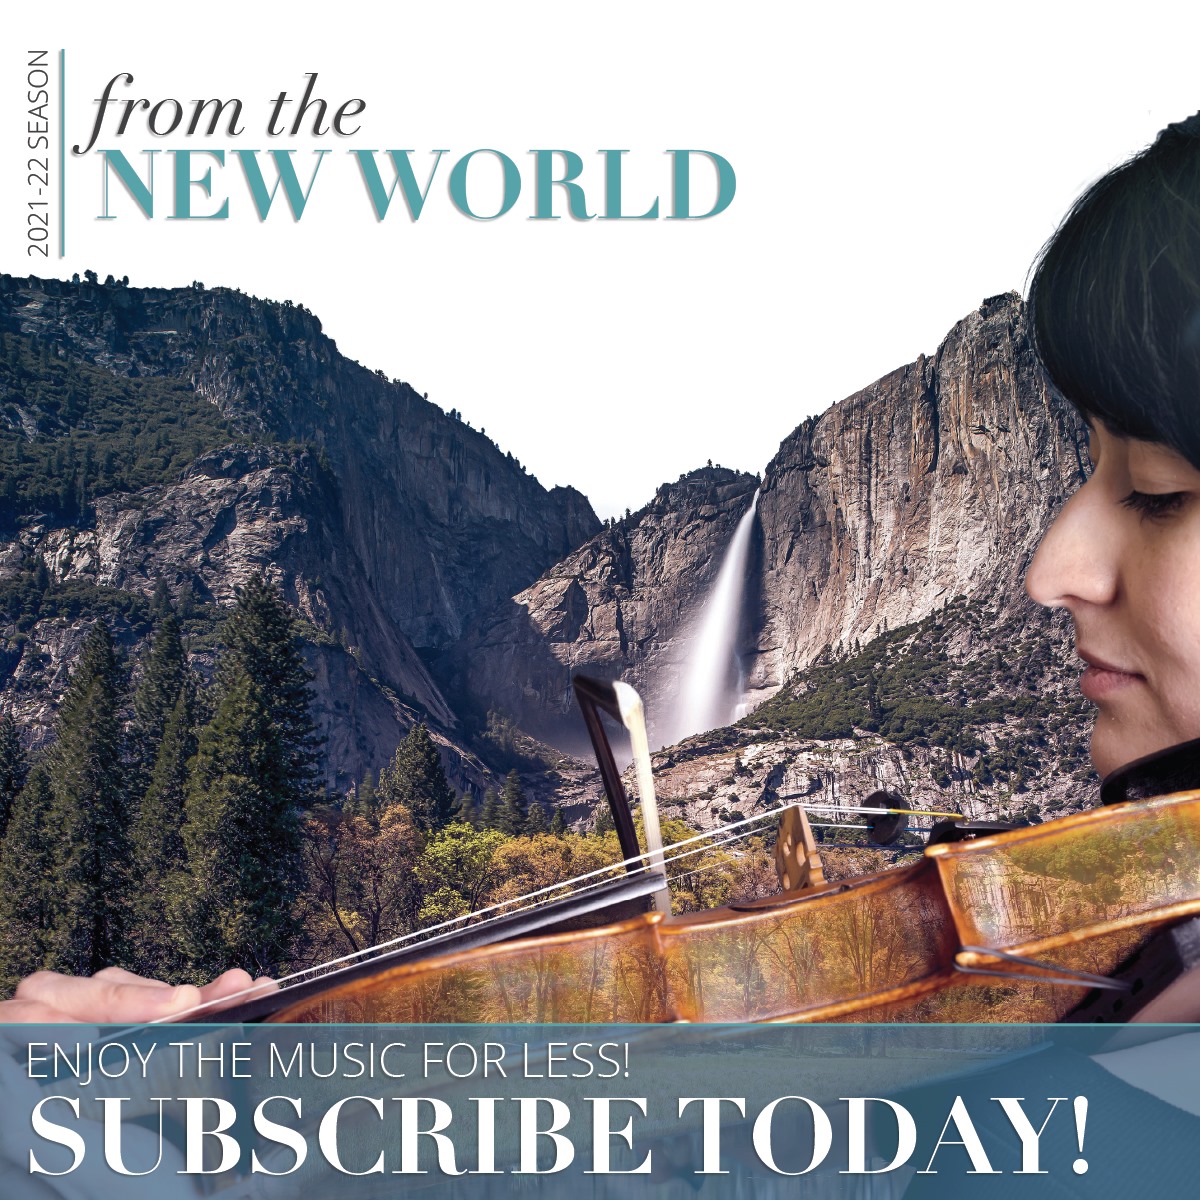 The QCSO 2021-22 season is themed "From the New World," named for the famous Antonin Dvorak "New World" Symphony on the first program Oct. 2-3.